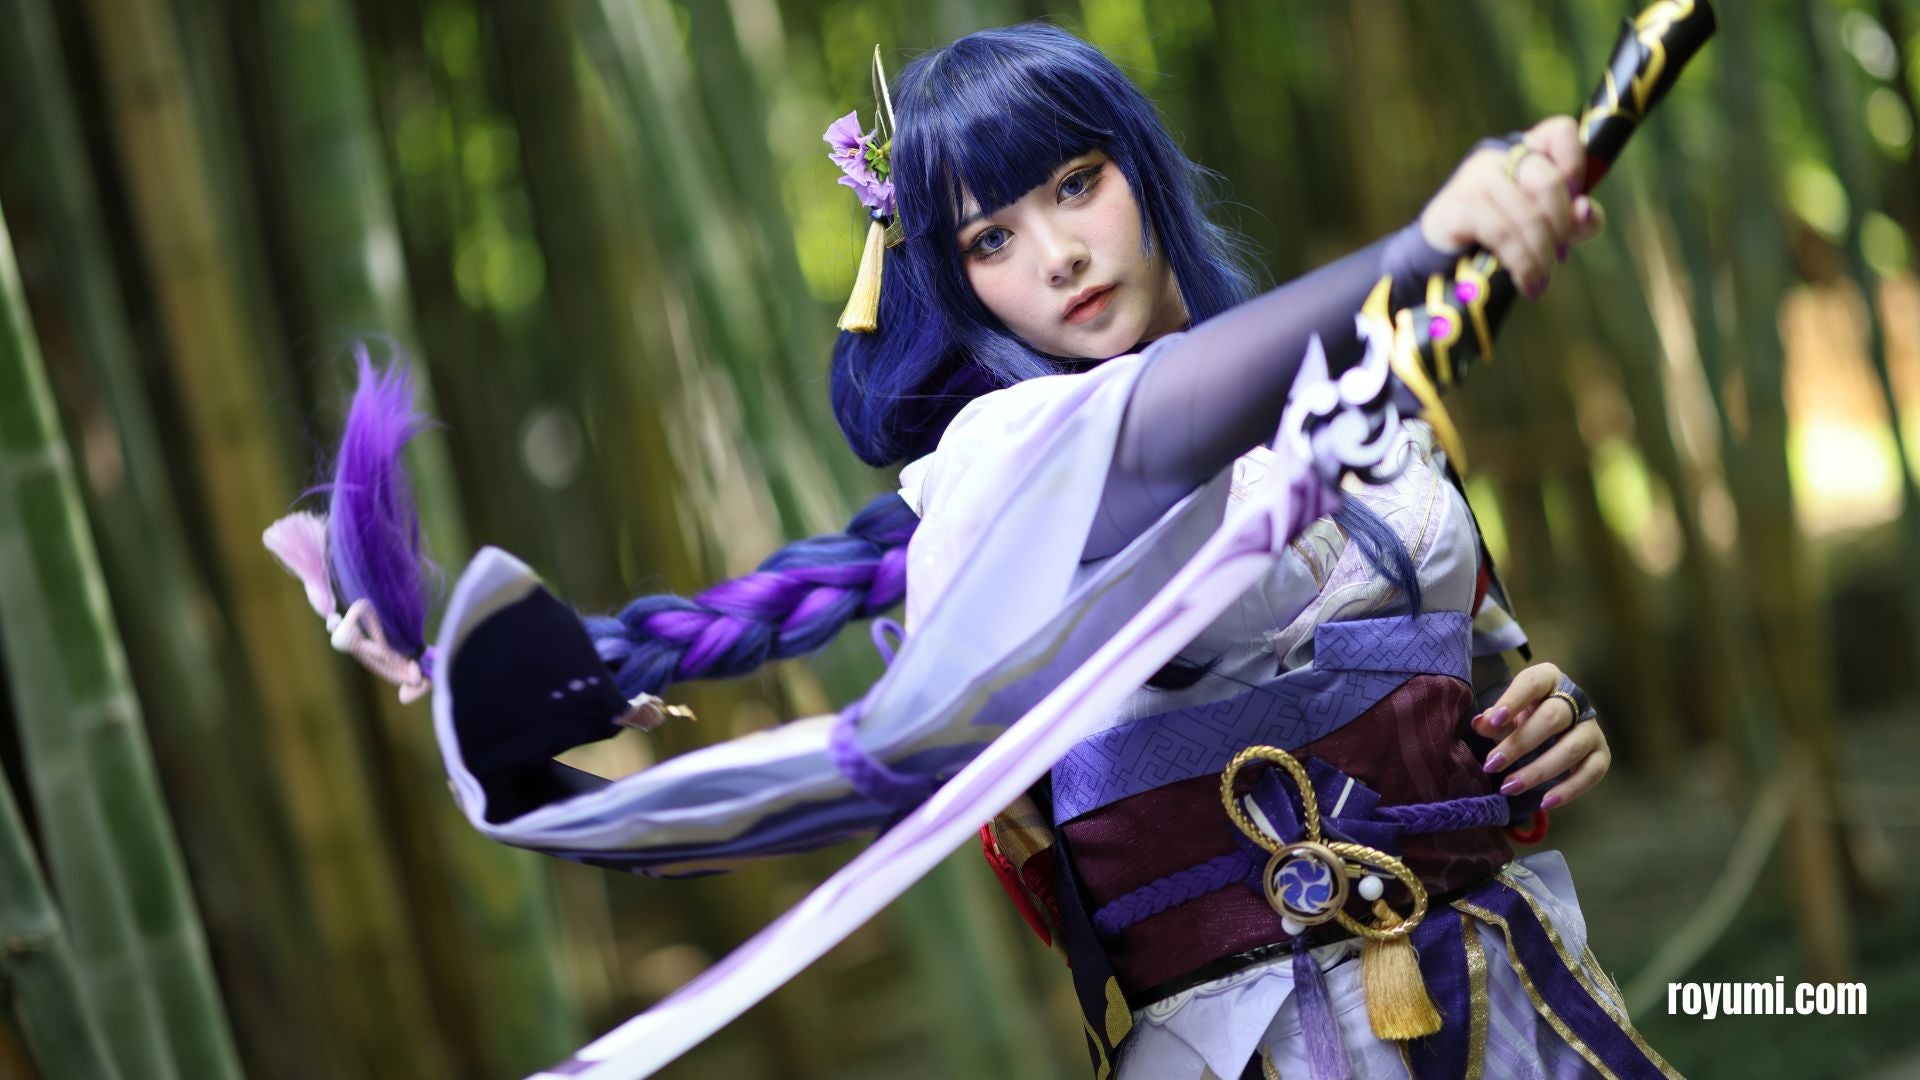 Cosplay: More than a Hobby, a Way of Life and Art